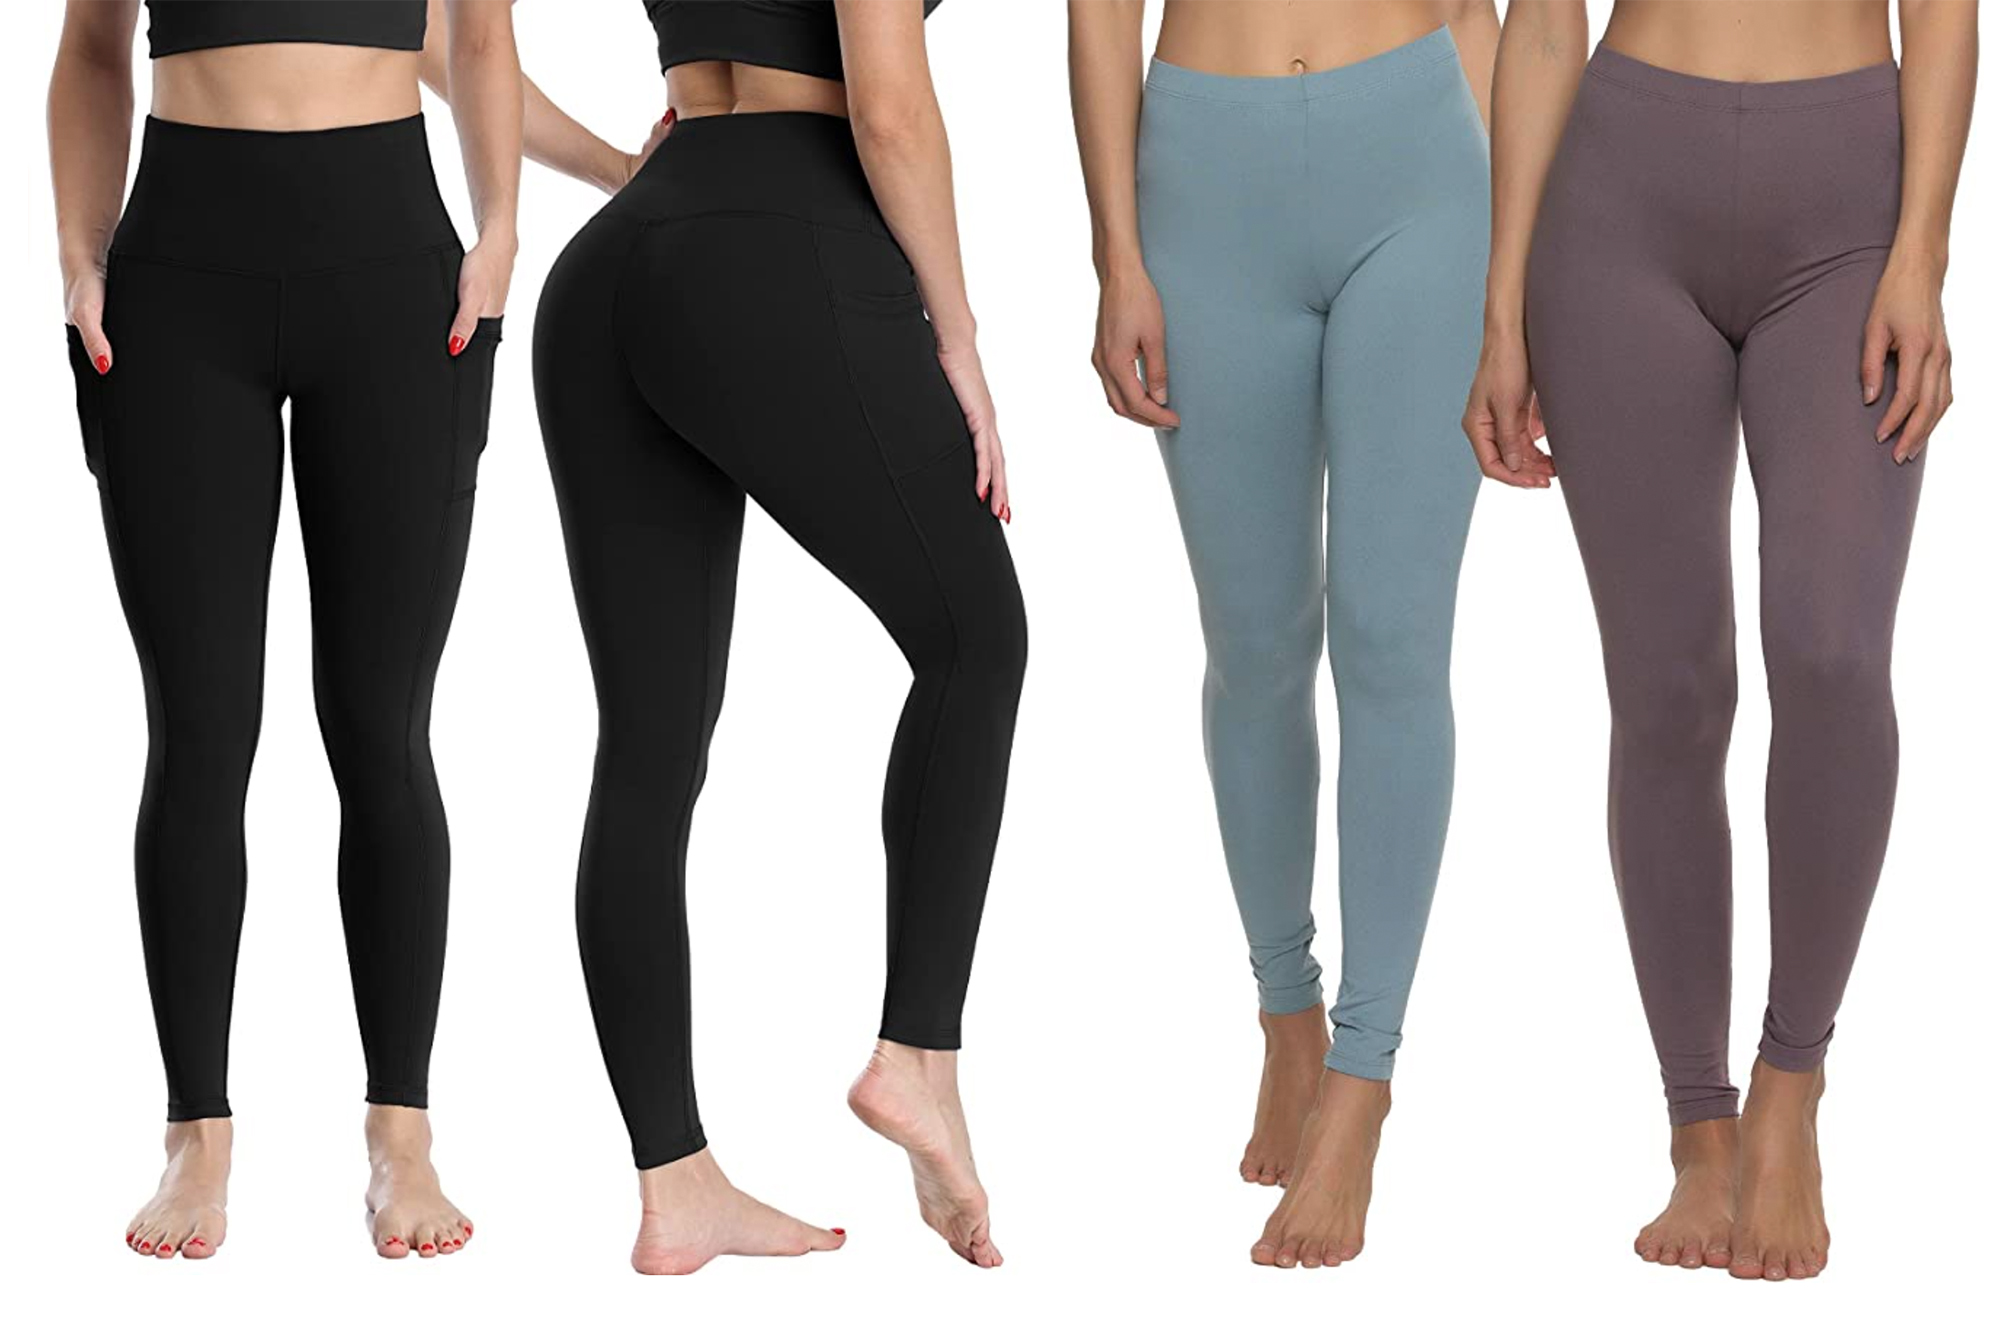 Why Are Leggings Popular Nowadays? 